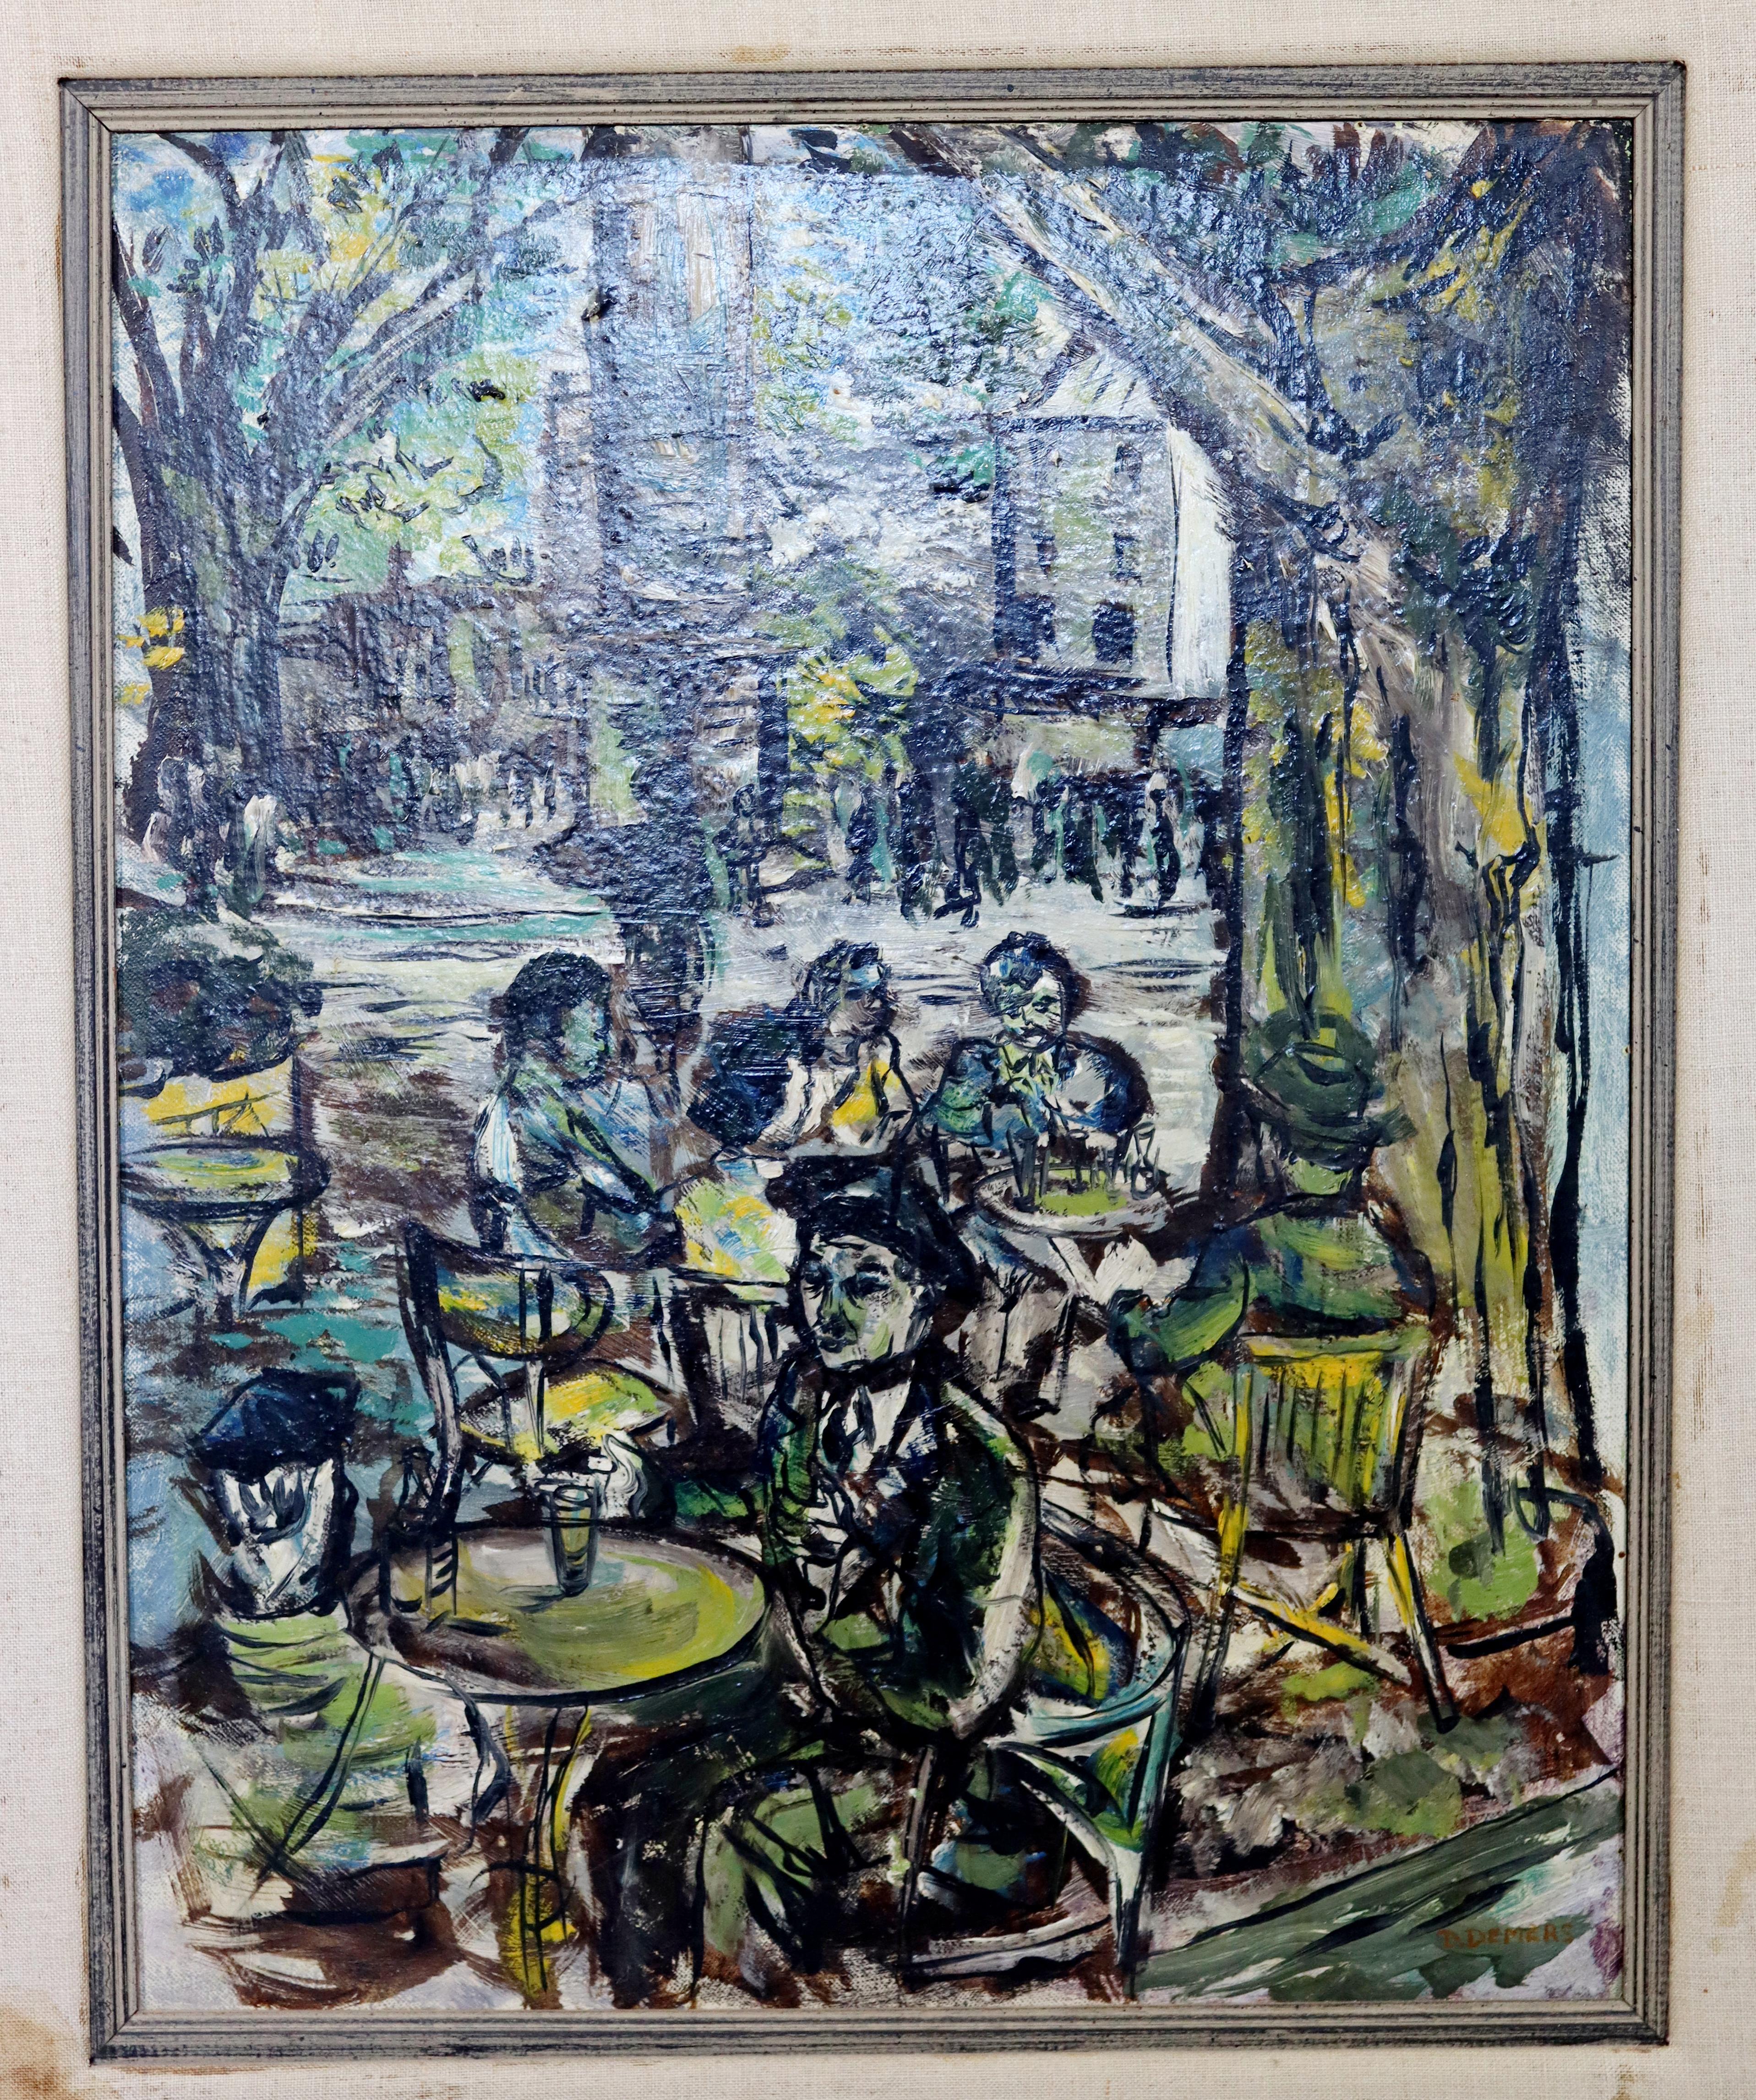 For your consideration is an sensational, framed oil painting on canvas, of a European cafe scene, signed D. Demers. In excellent condition. The dimensions of the frame are 24